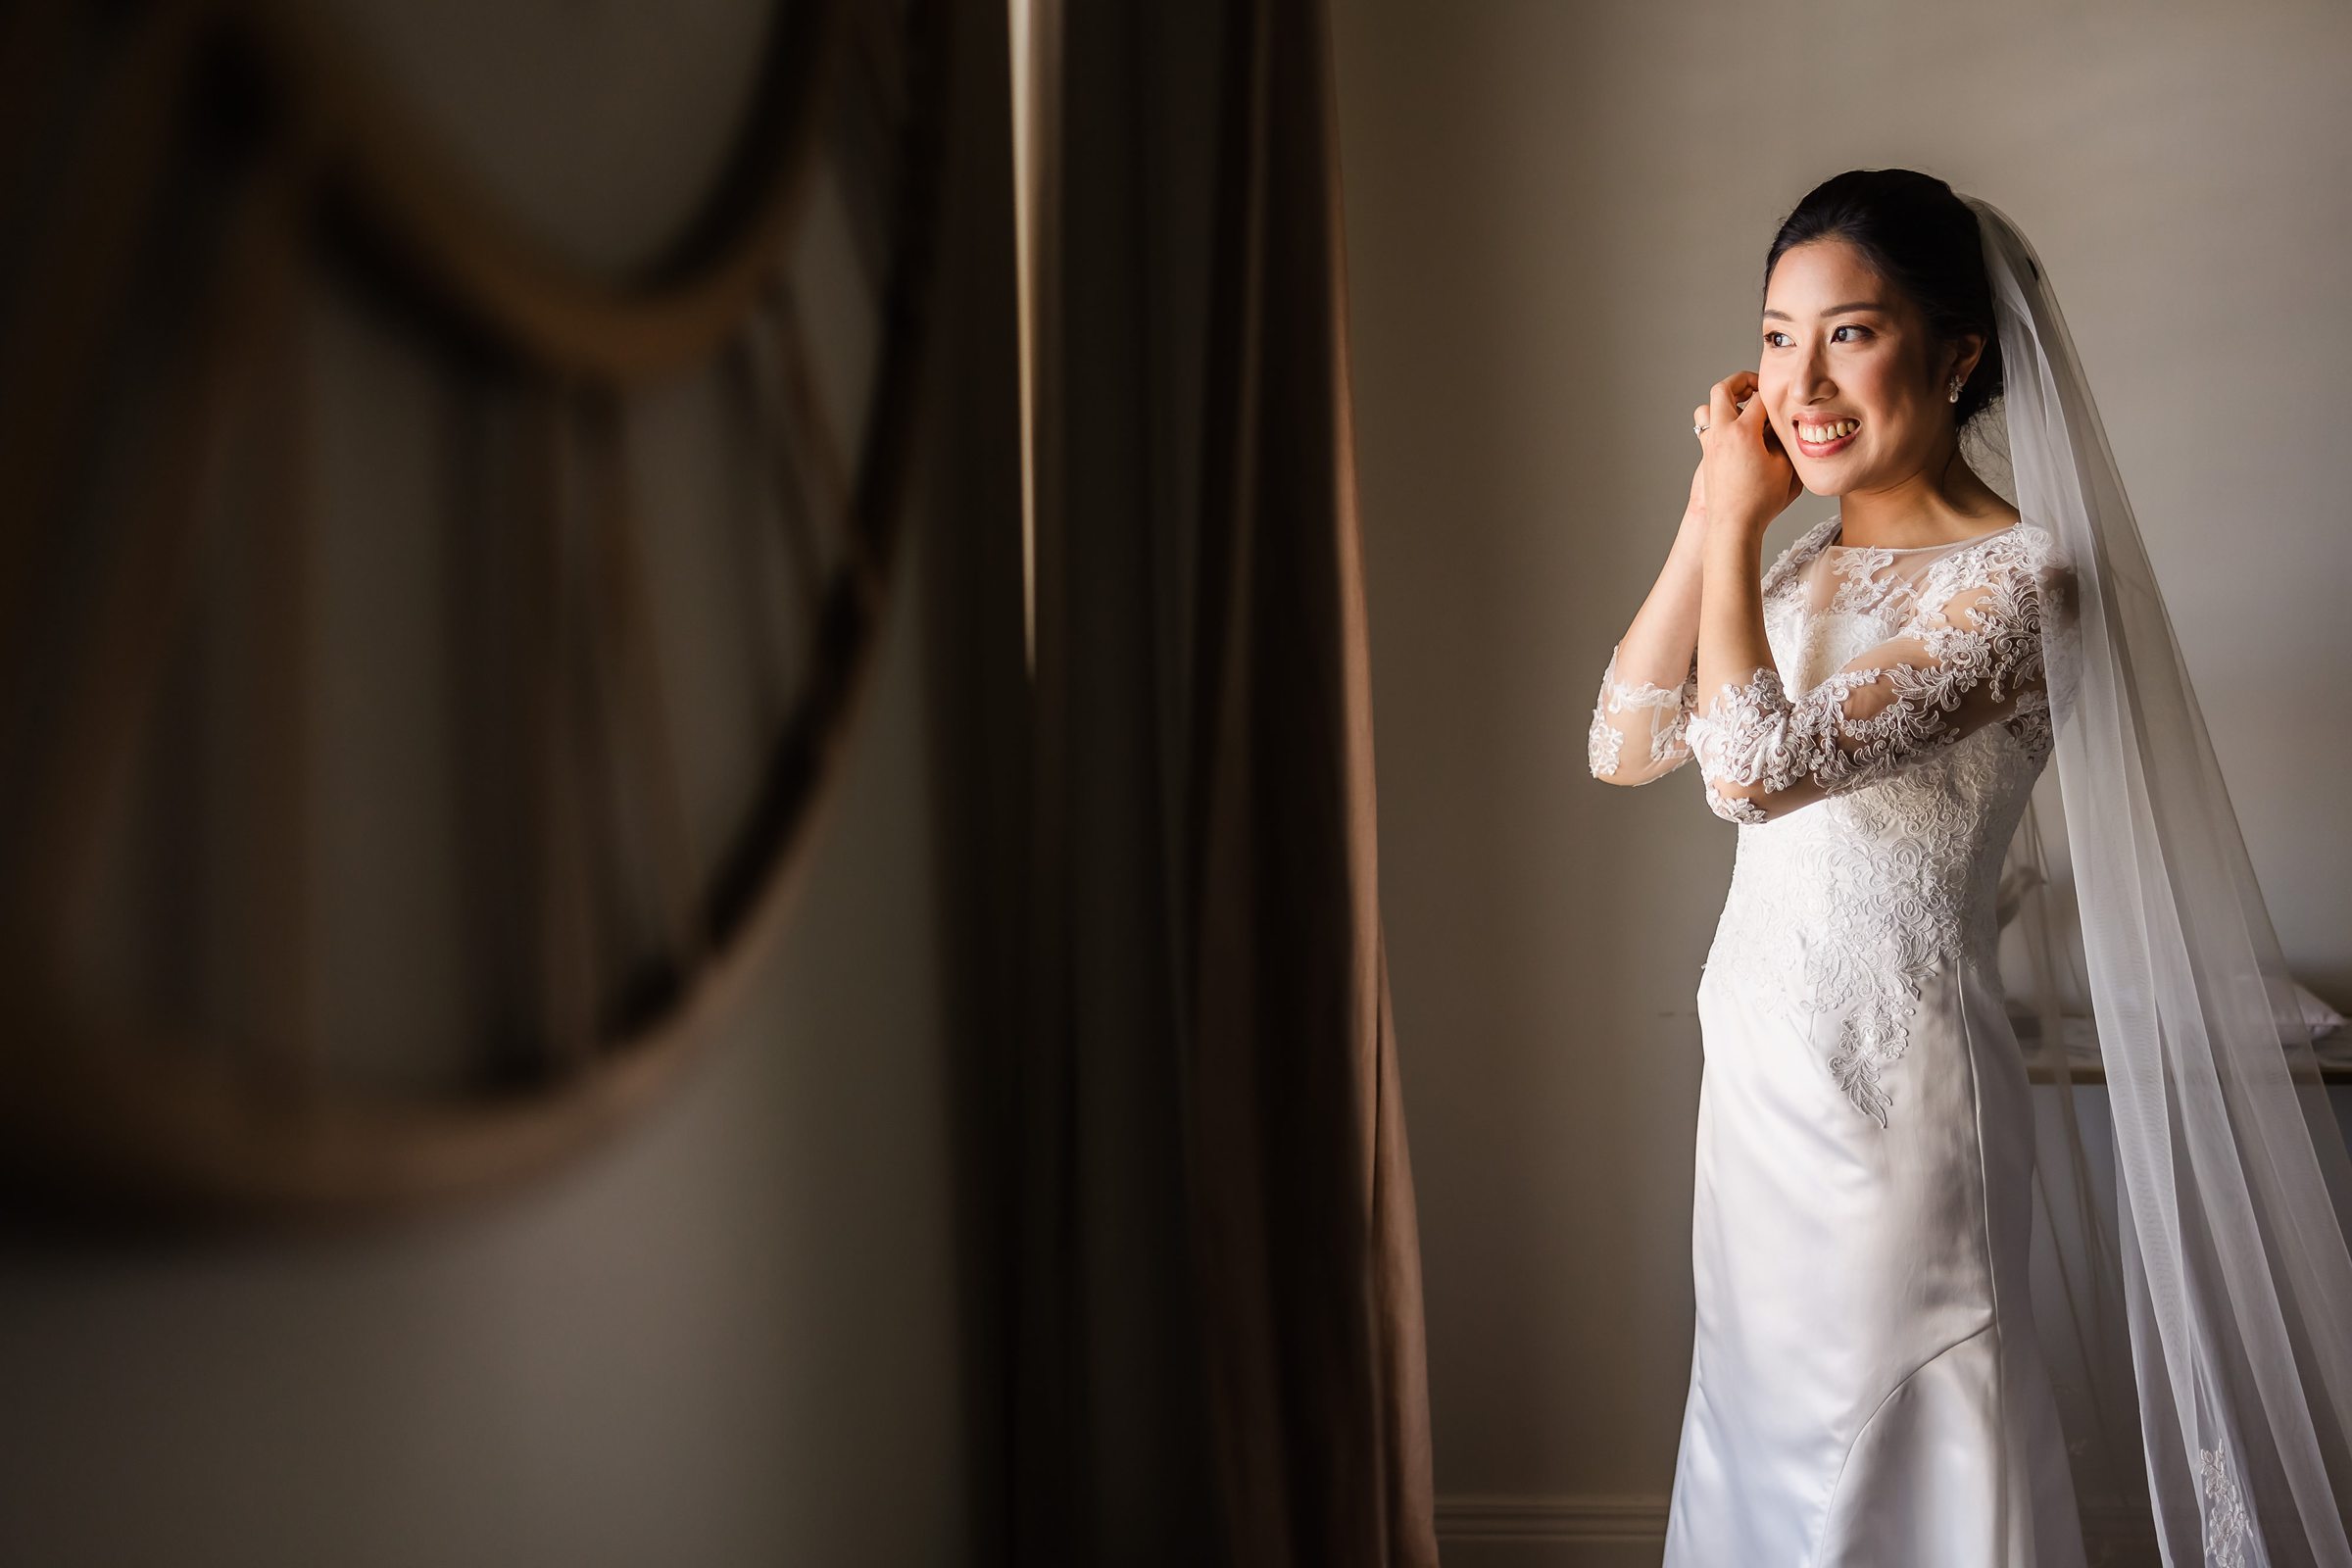 Bride gets ready for her wedding at the Ritz Charles in Carmel, Indiana.